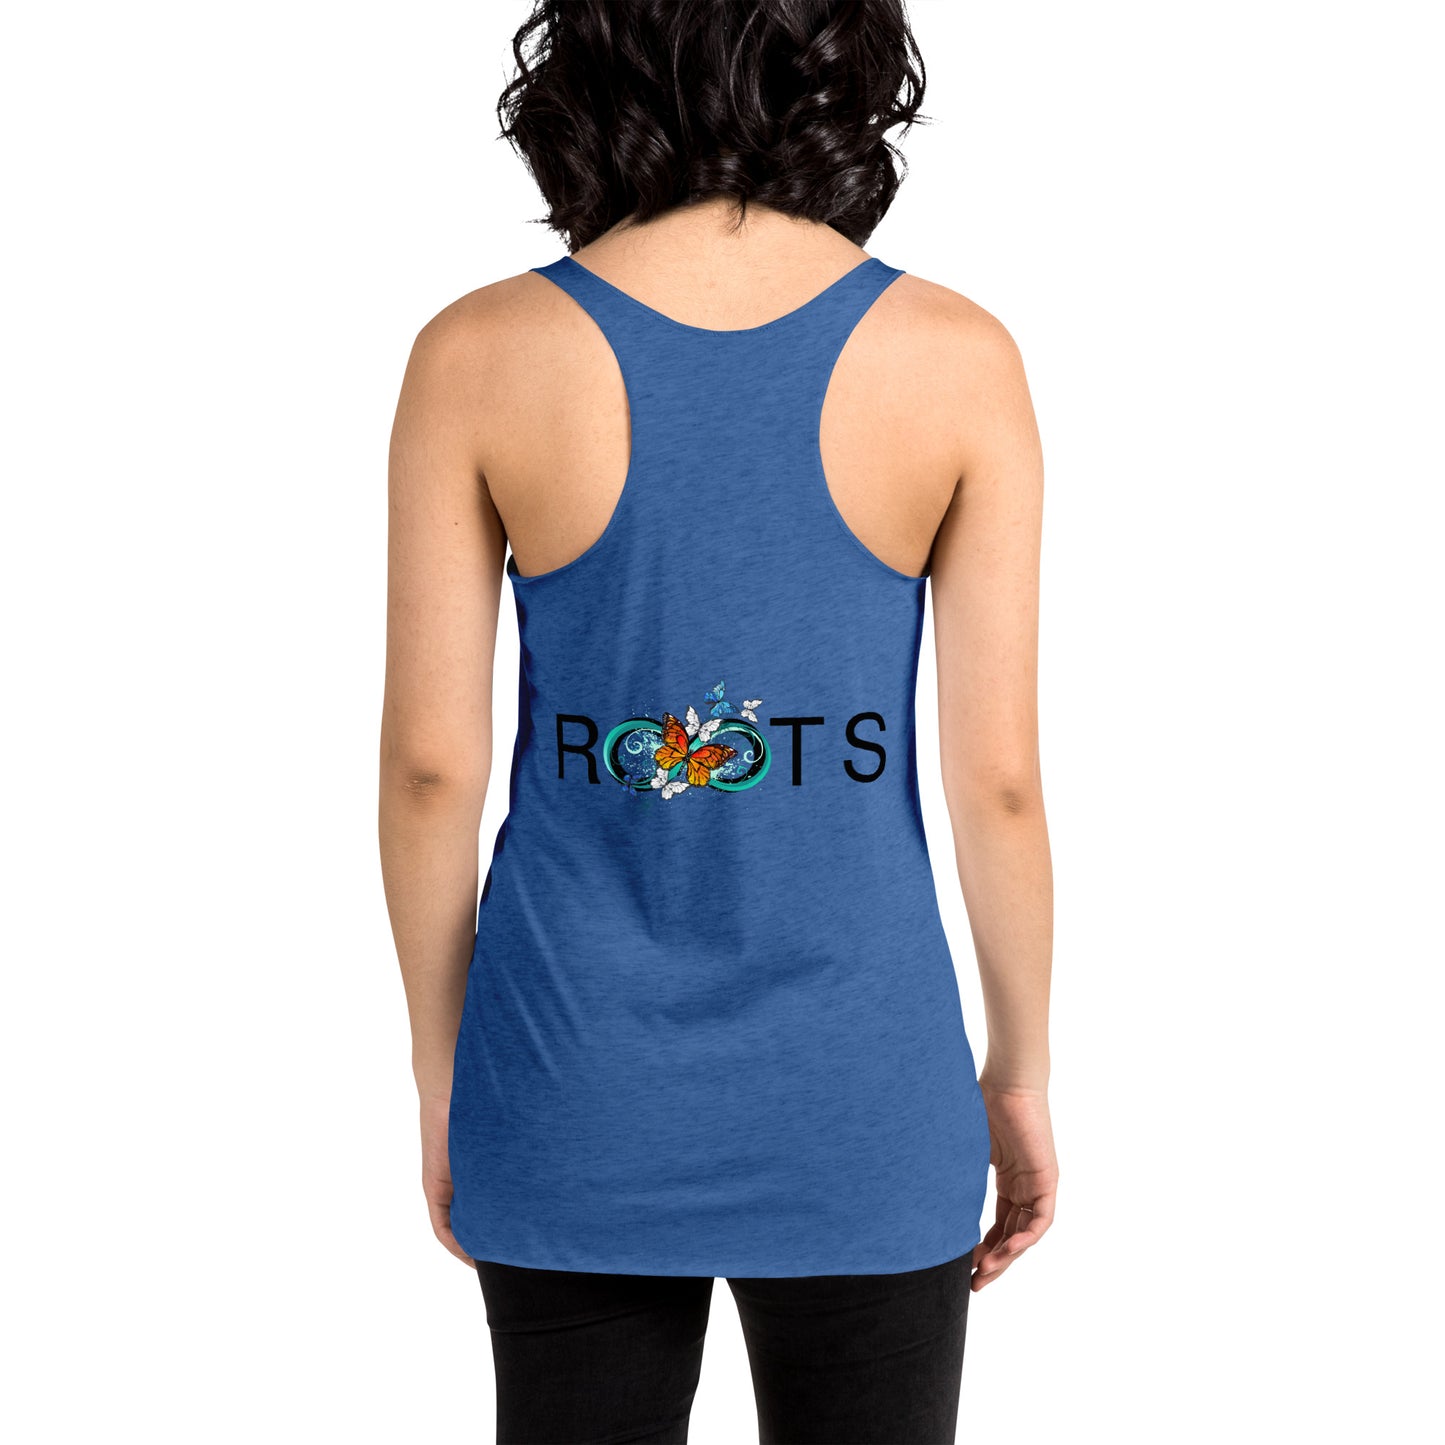 Roots Are Forever Women's Racerback Tank